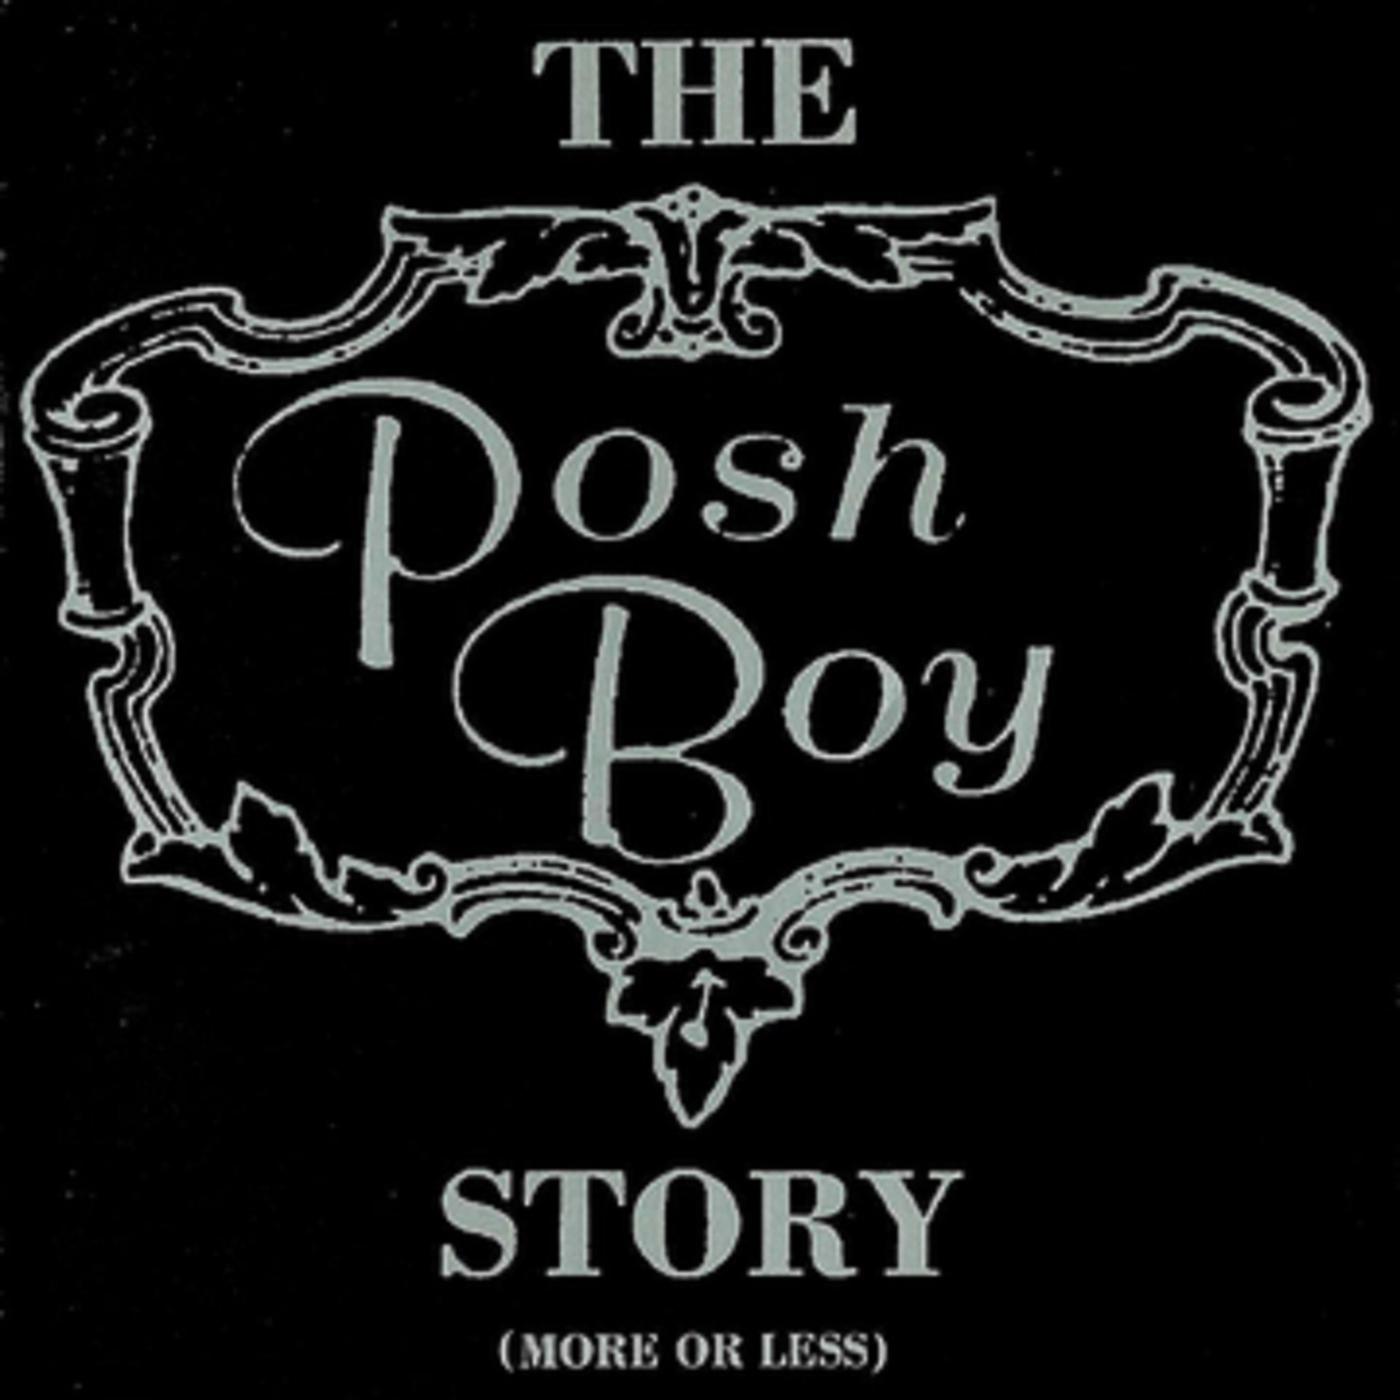 The Posh Boy Story (More or Less)